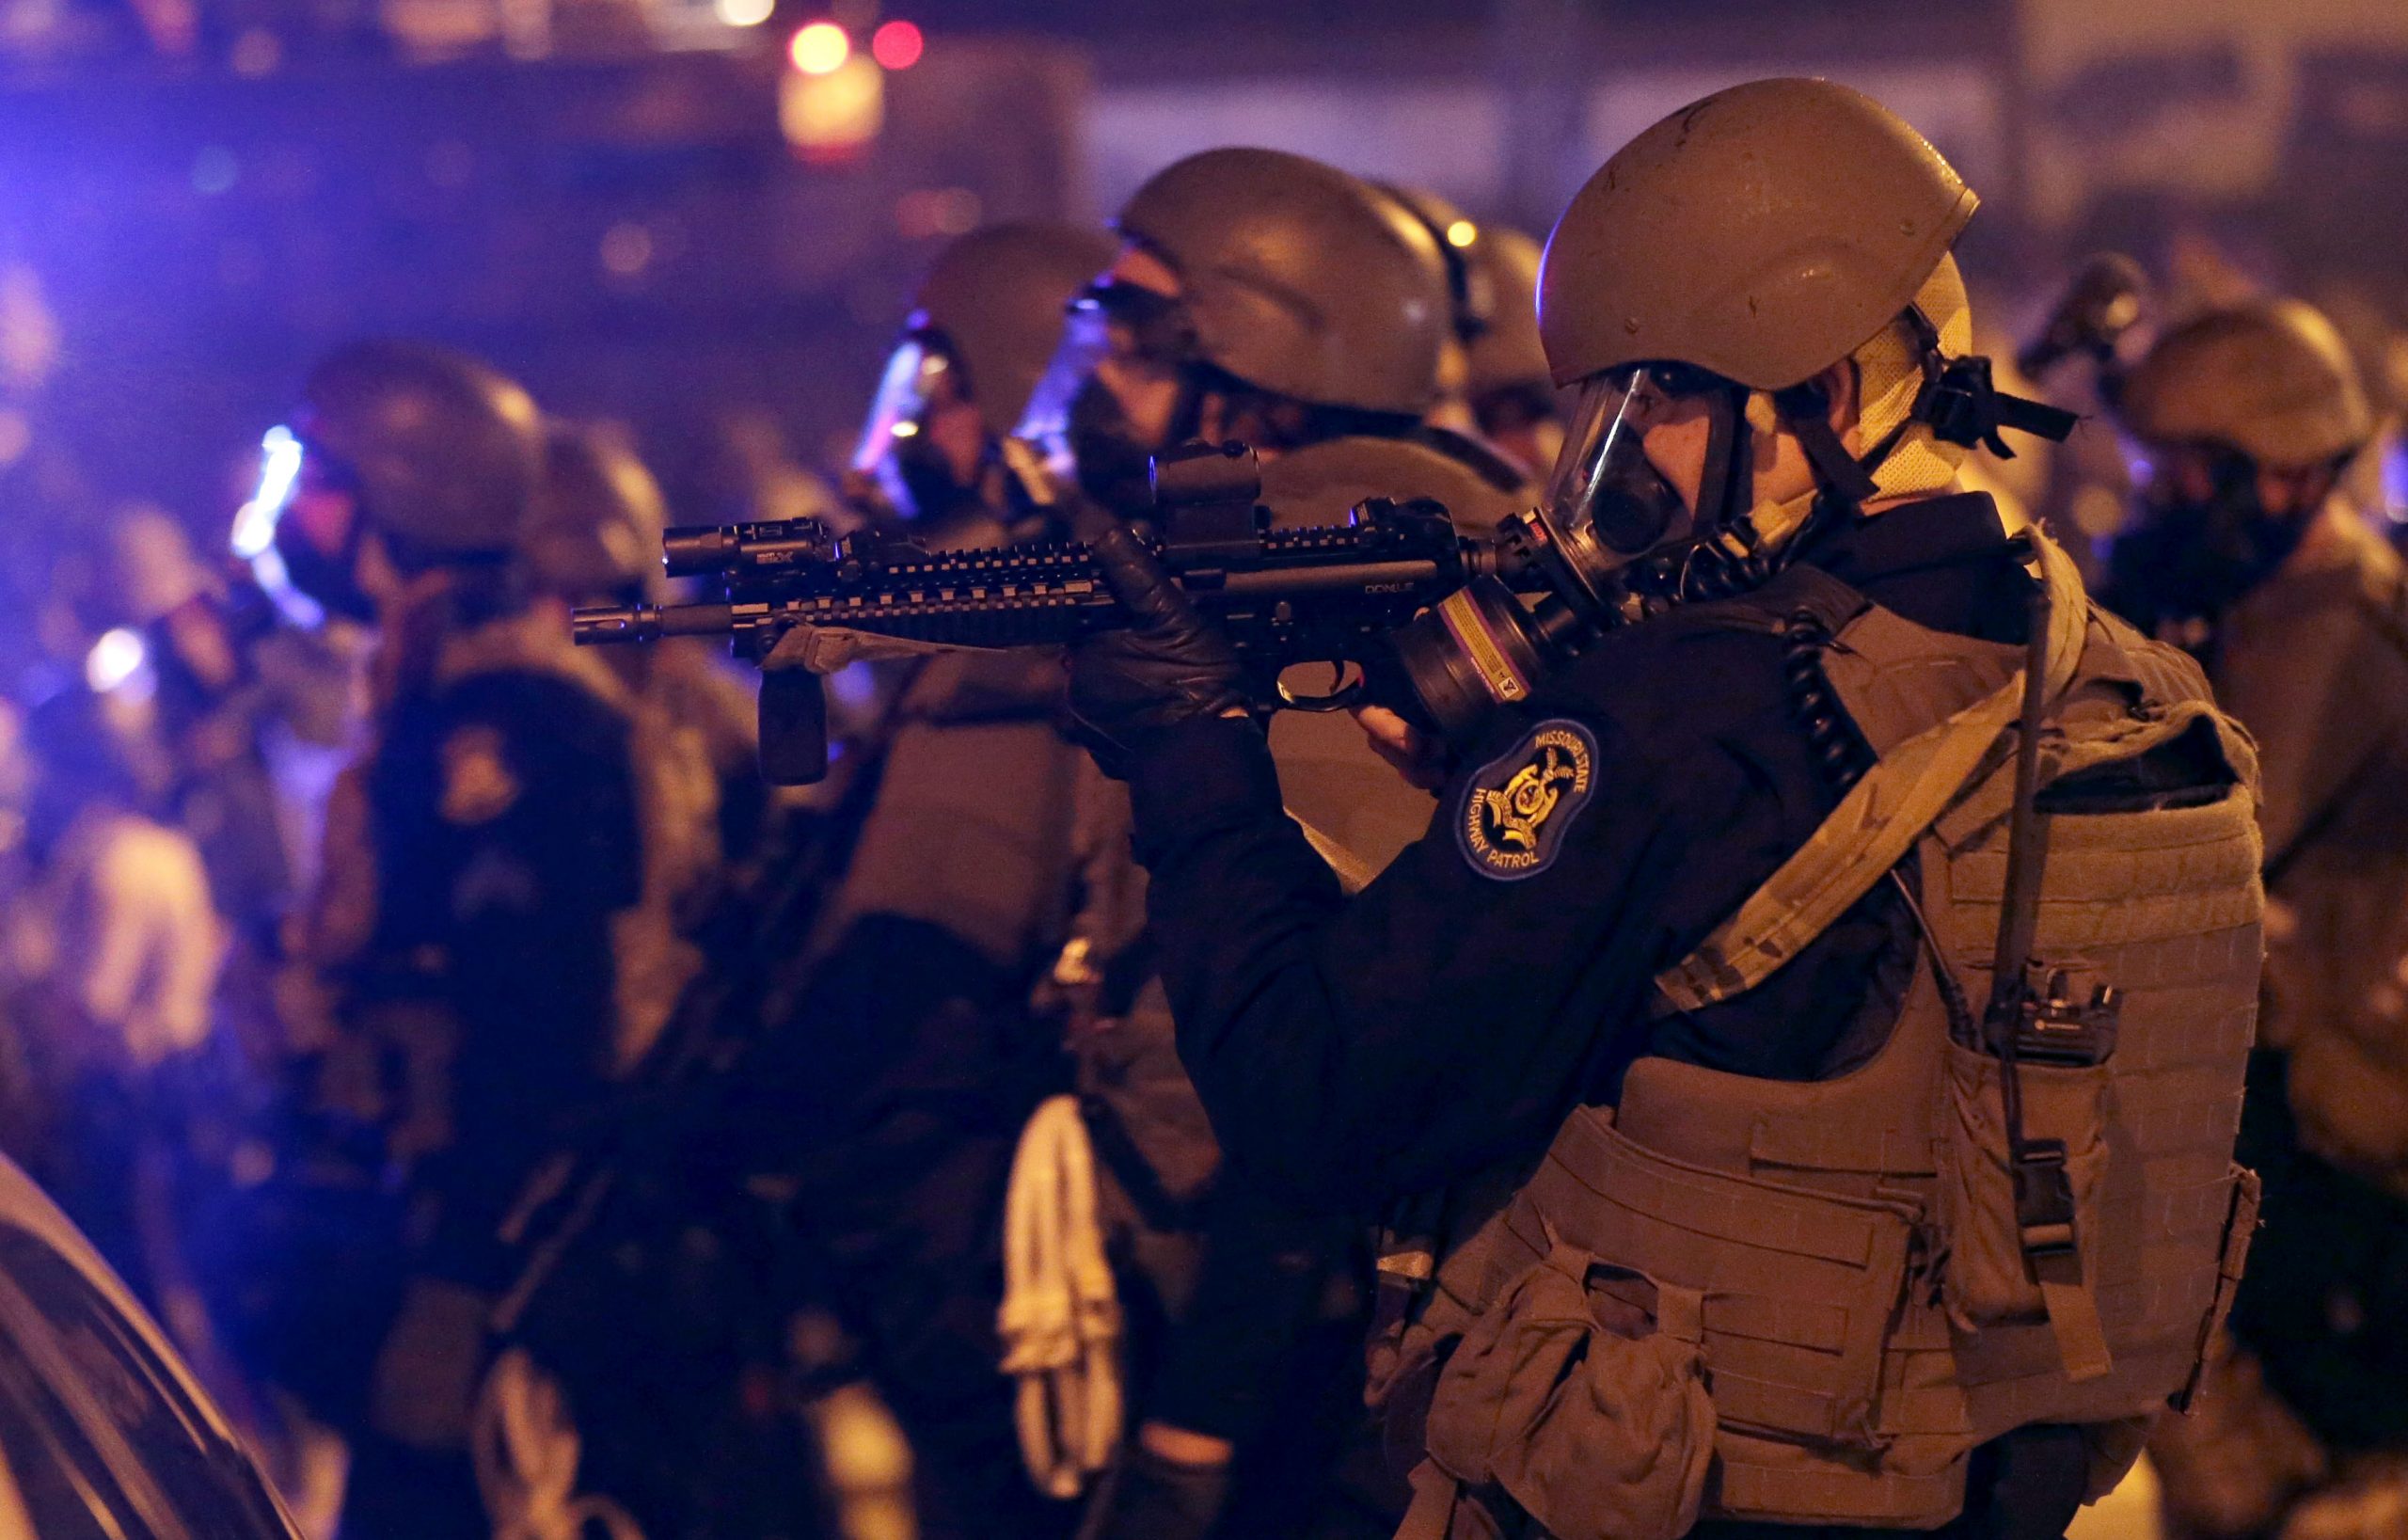 Police advance after tear gas was used to disperse a crowd Sunday, Aug. 17, 2014, during a protest for Michael Brown, who was killed by a police officer last Saturday in Ferguson, Mo. (AP Photo/Charlie Riedel)